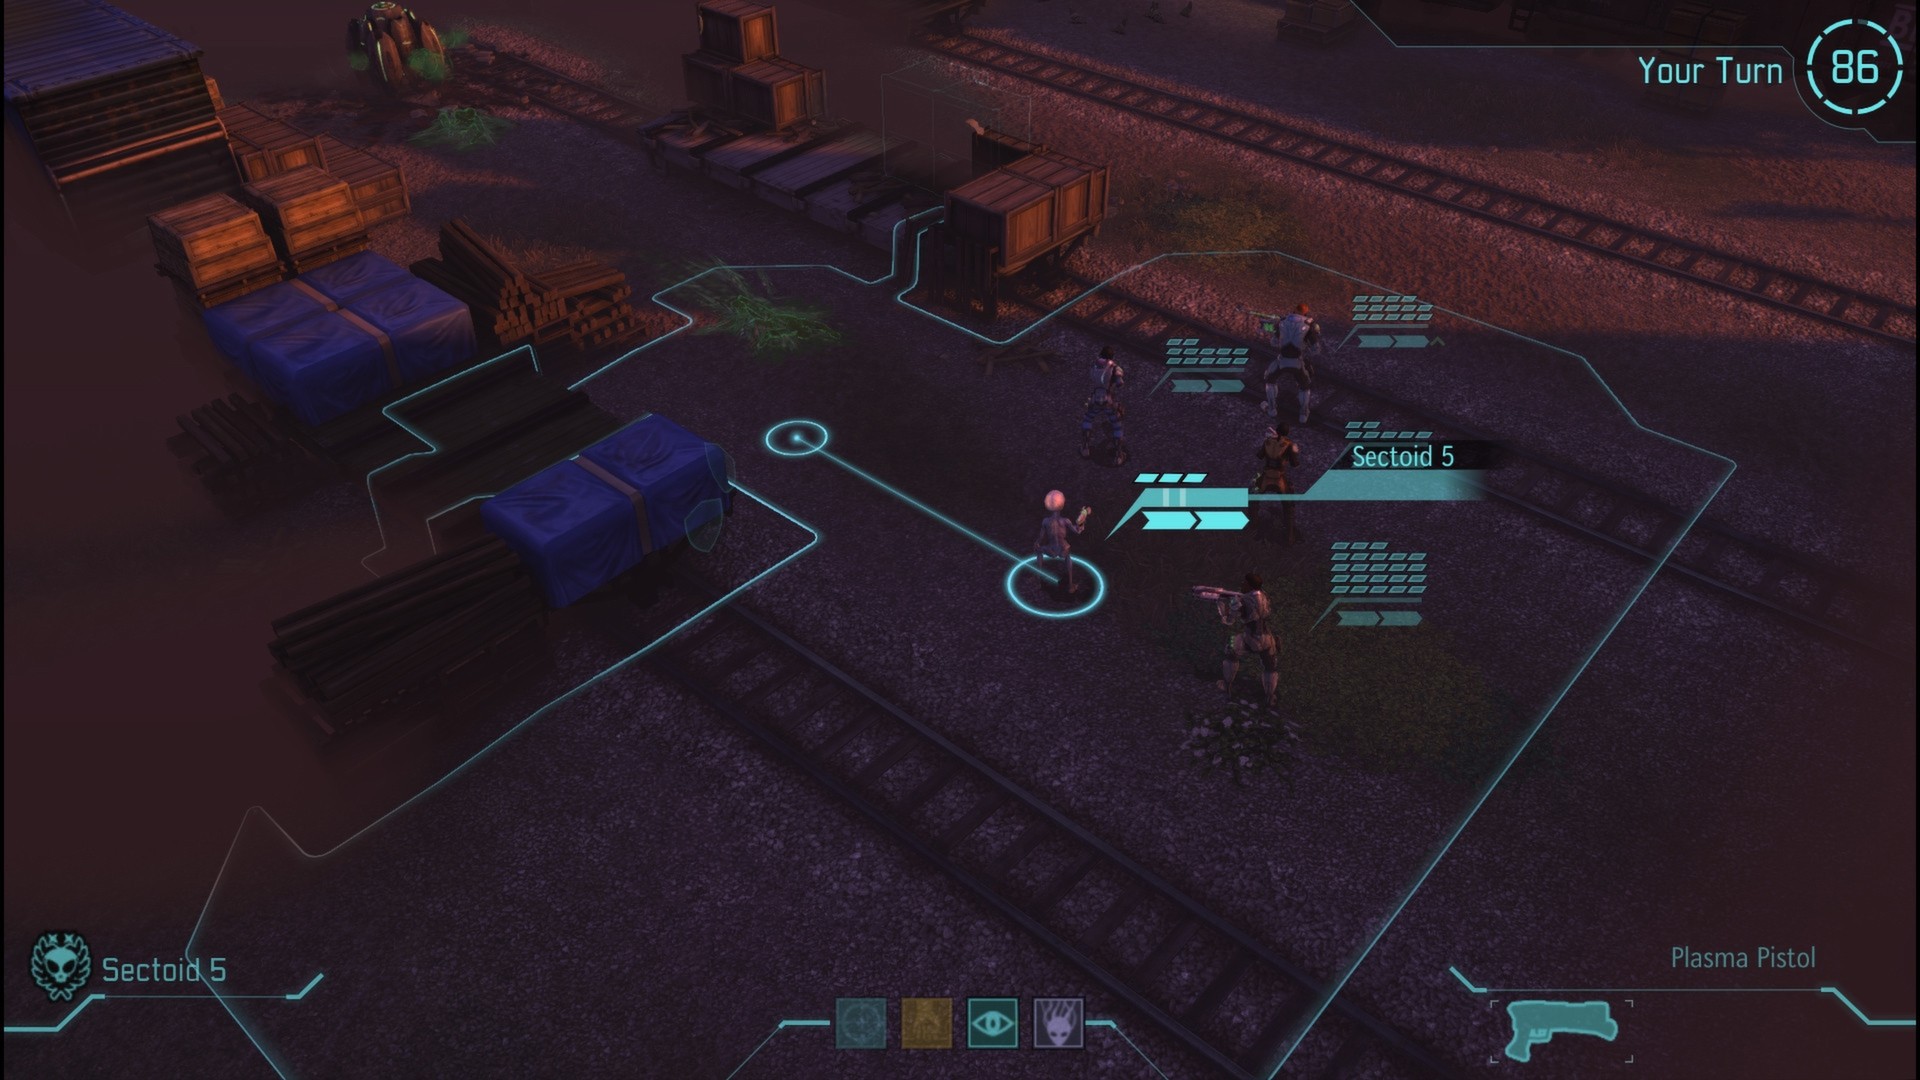 9/10 strategy game from XCOM devs in incredible Steam sale